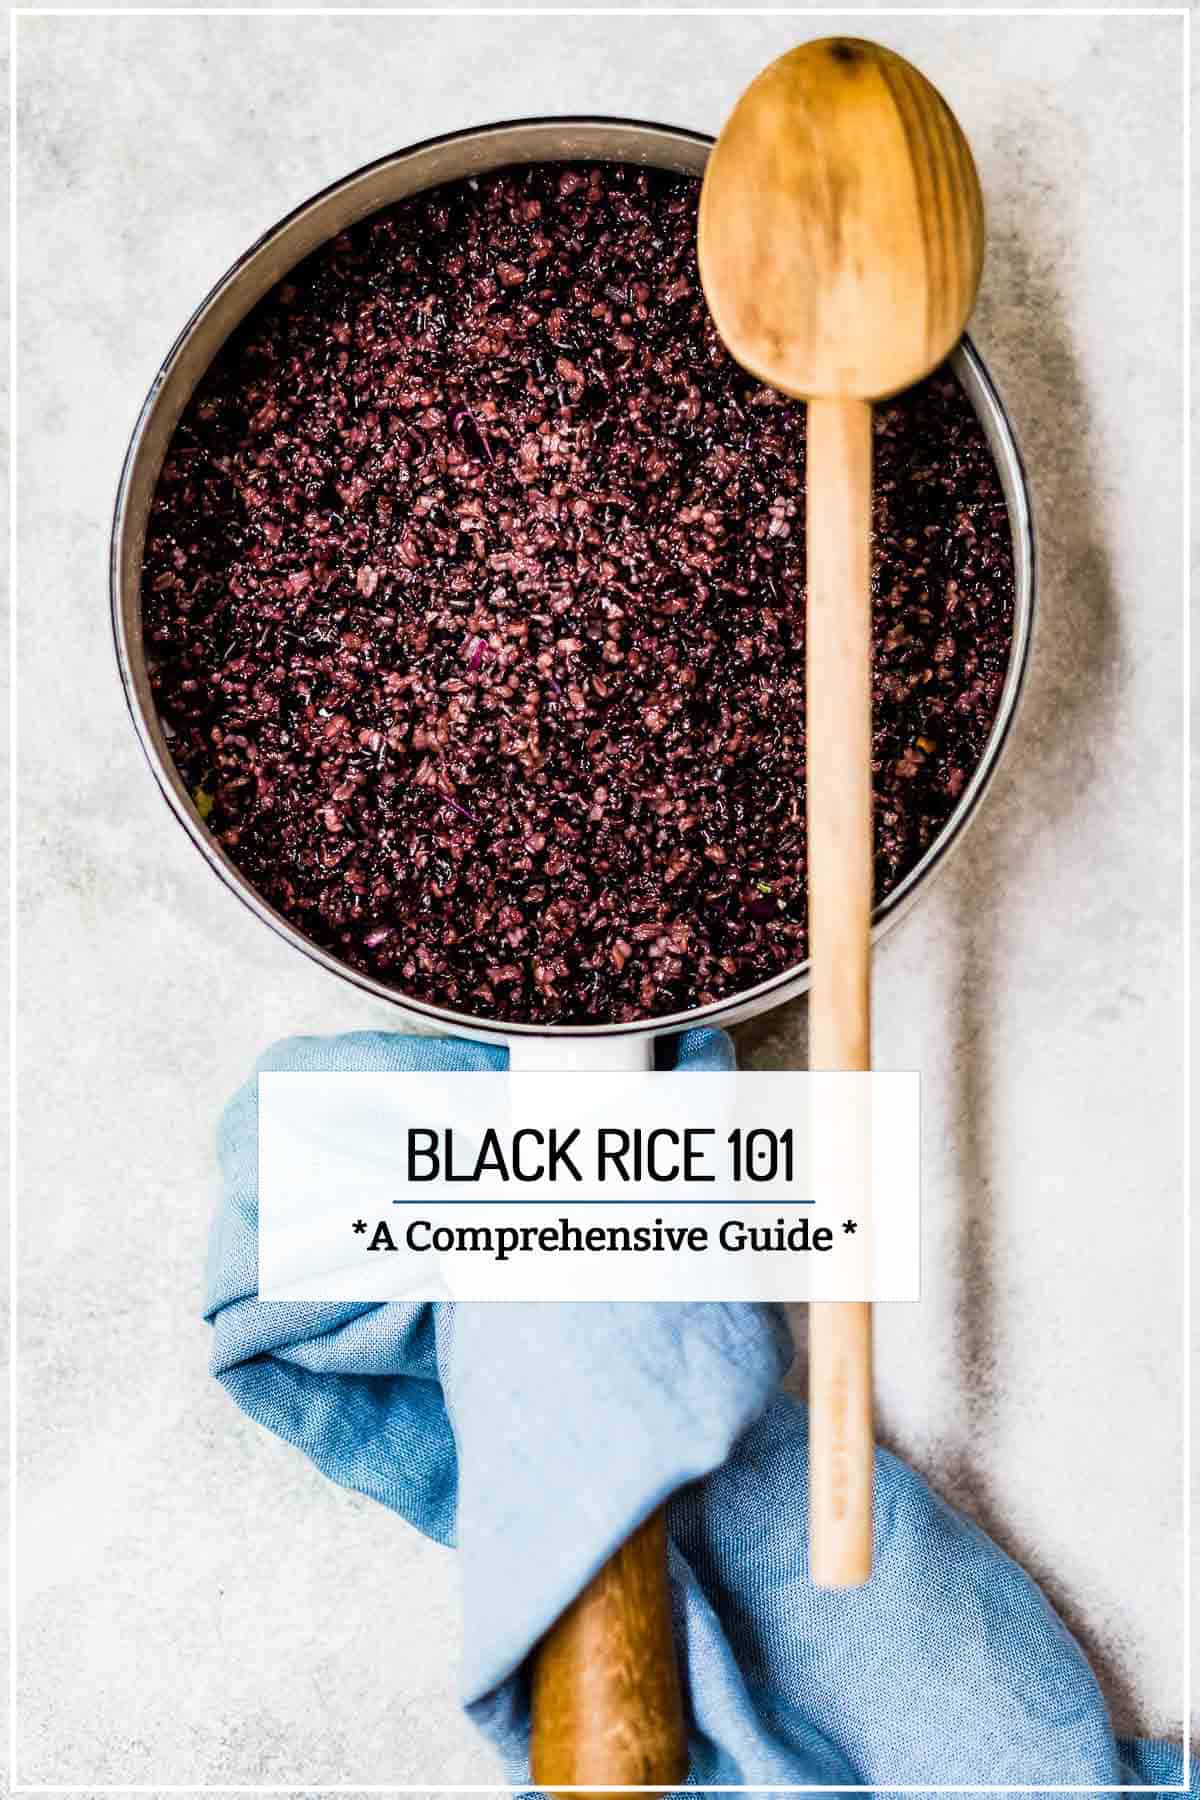 Black rice in a saucepan from the top view